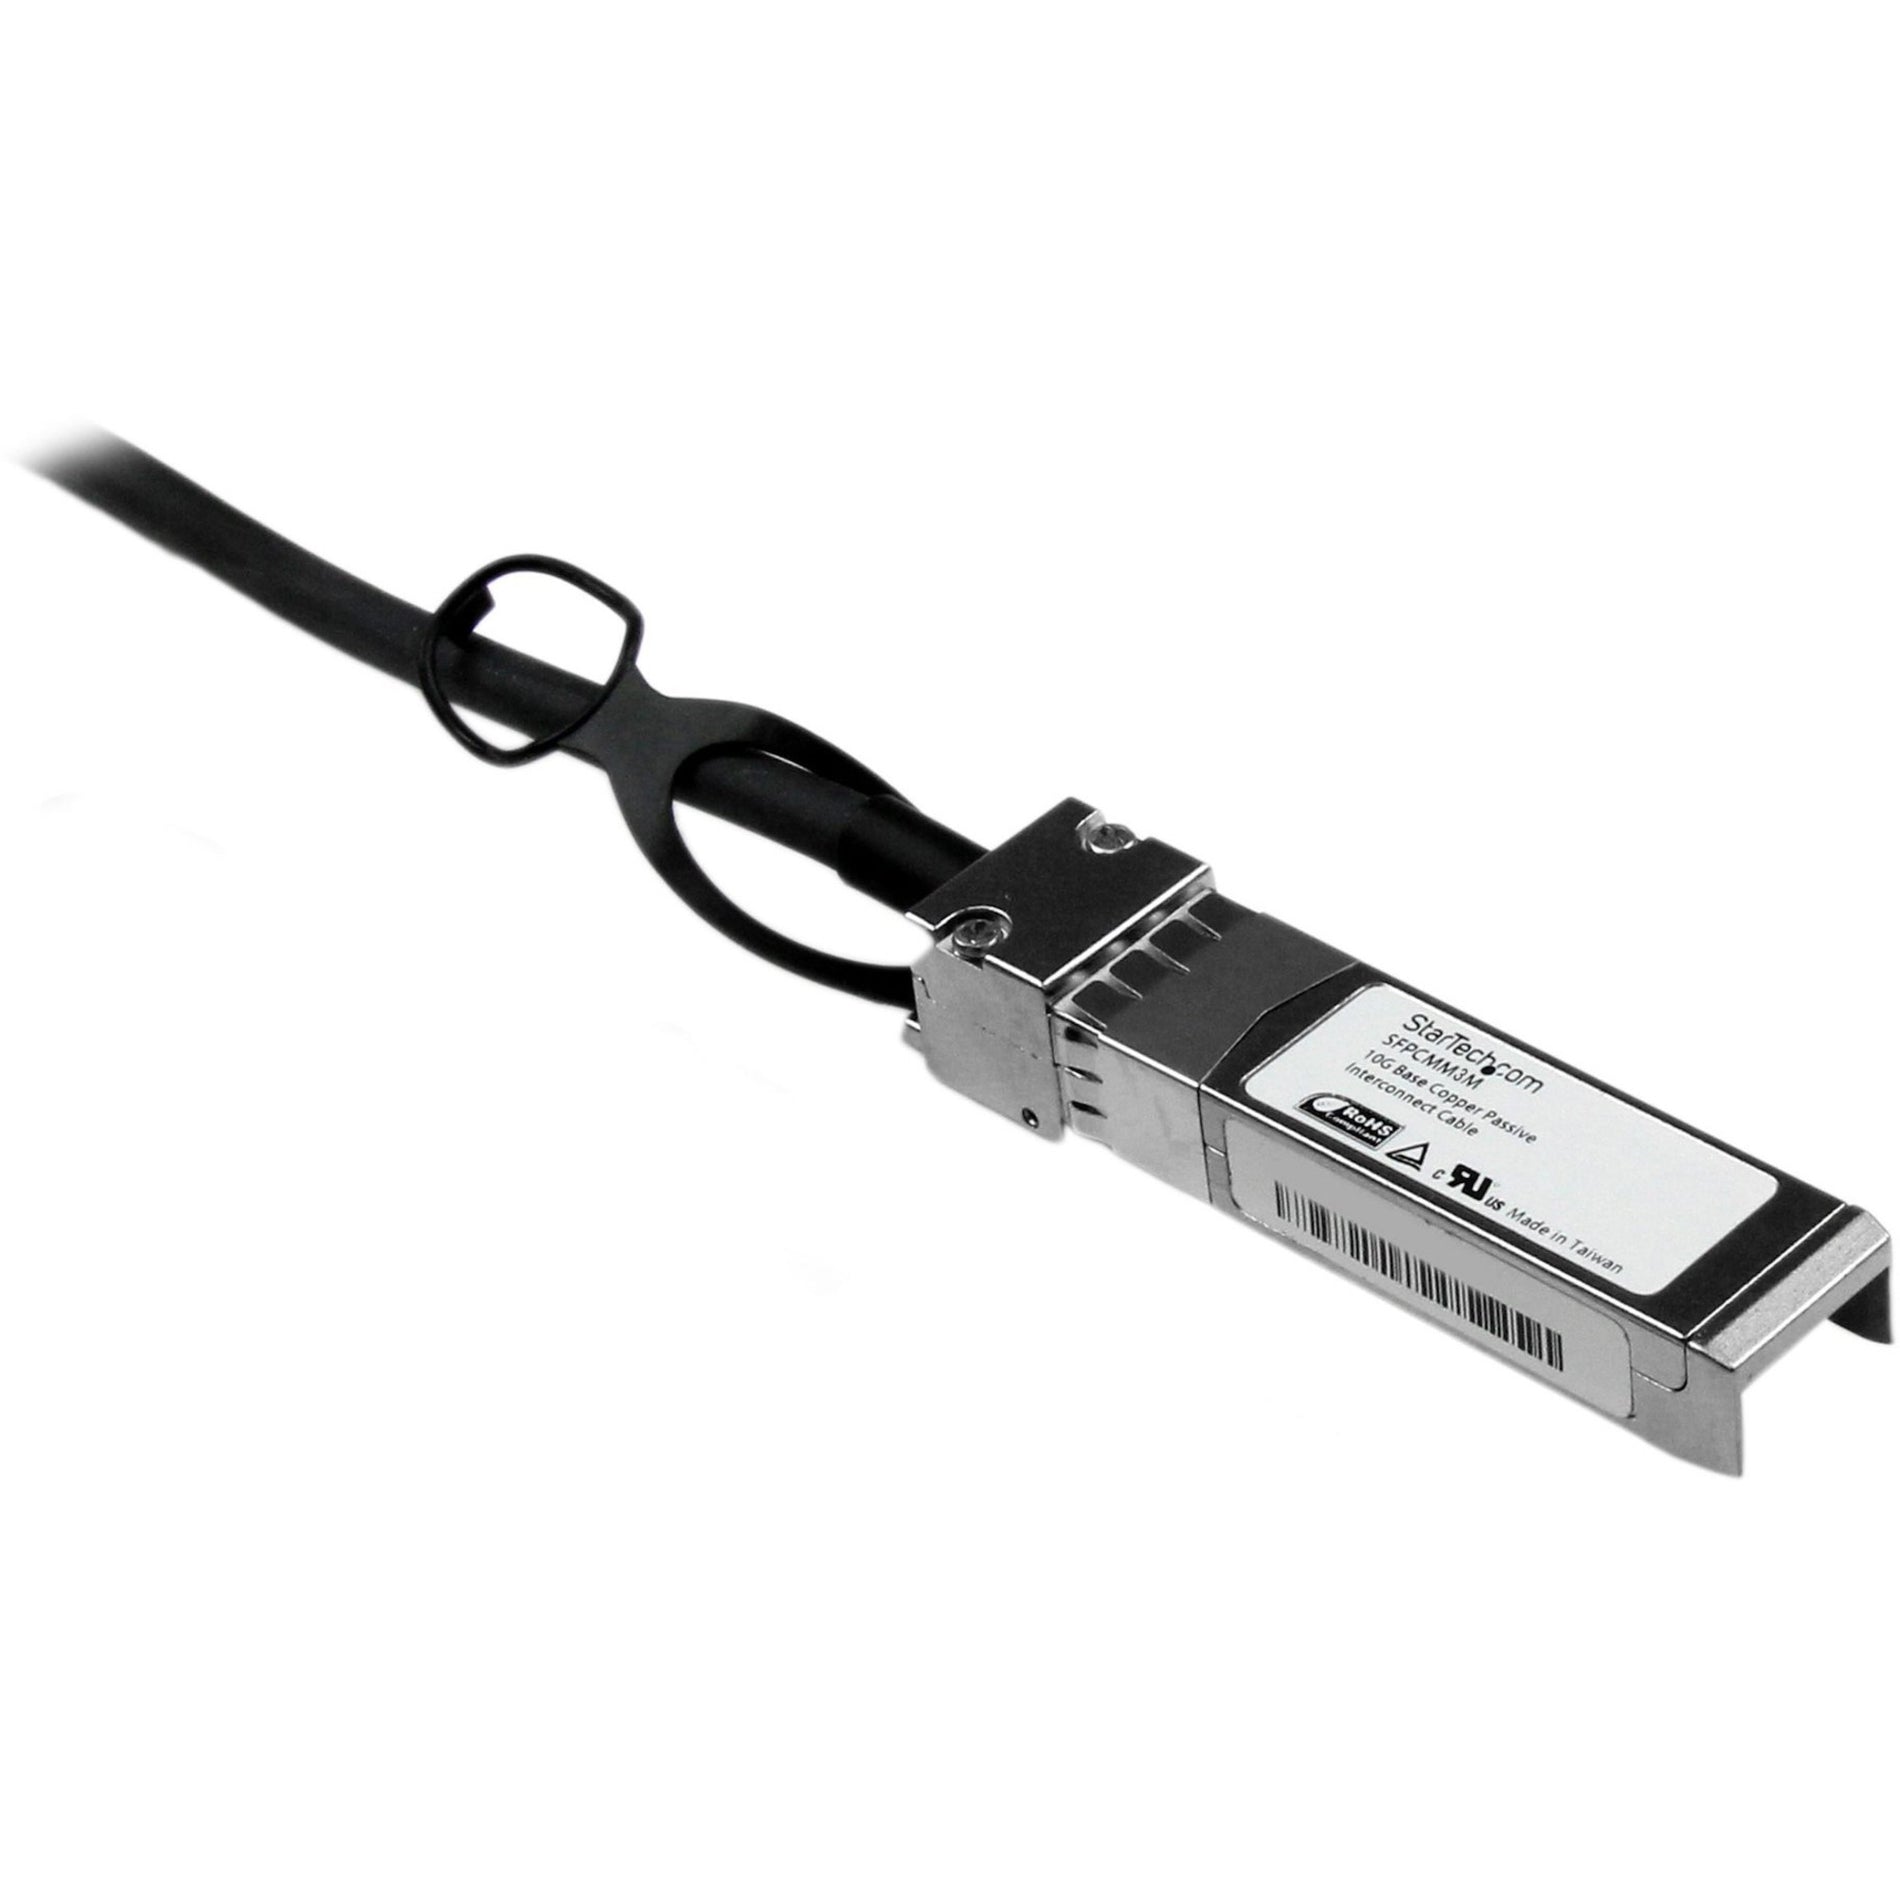 StarTech.com SFPCMM3M 3m Cisco Compatible SFP+ 10-Gigabit Ethernet (10GbE) Twinax Direct Attach Cable, Passive, Hot-swappable, 10 Gbit/s Data Transfer Rate